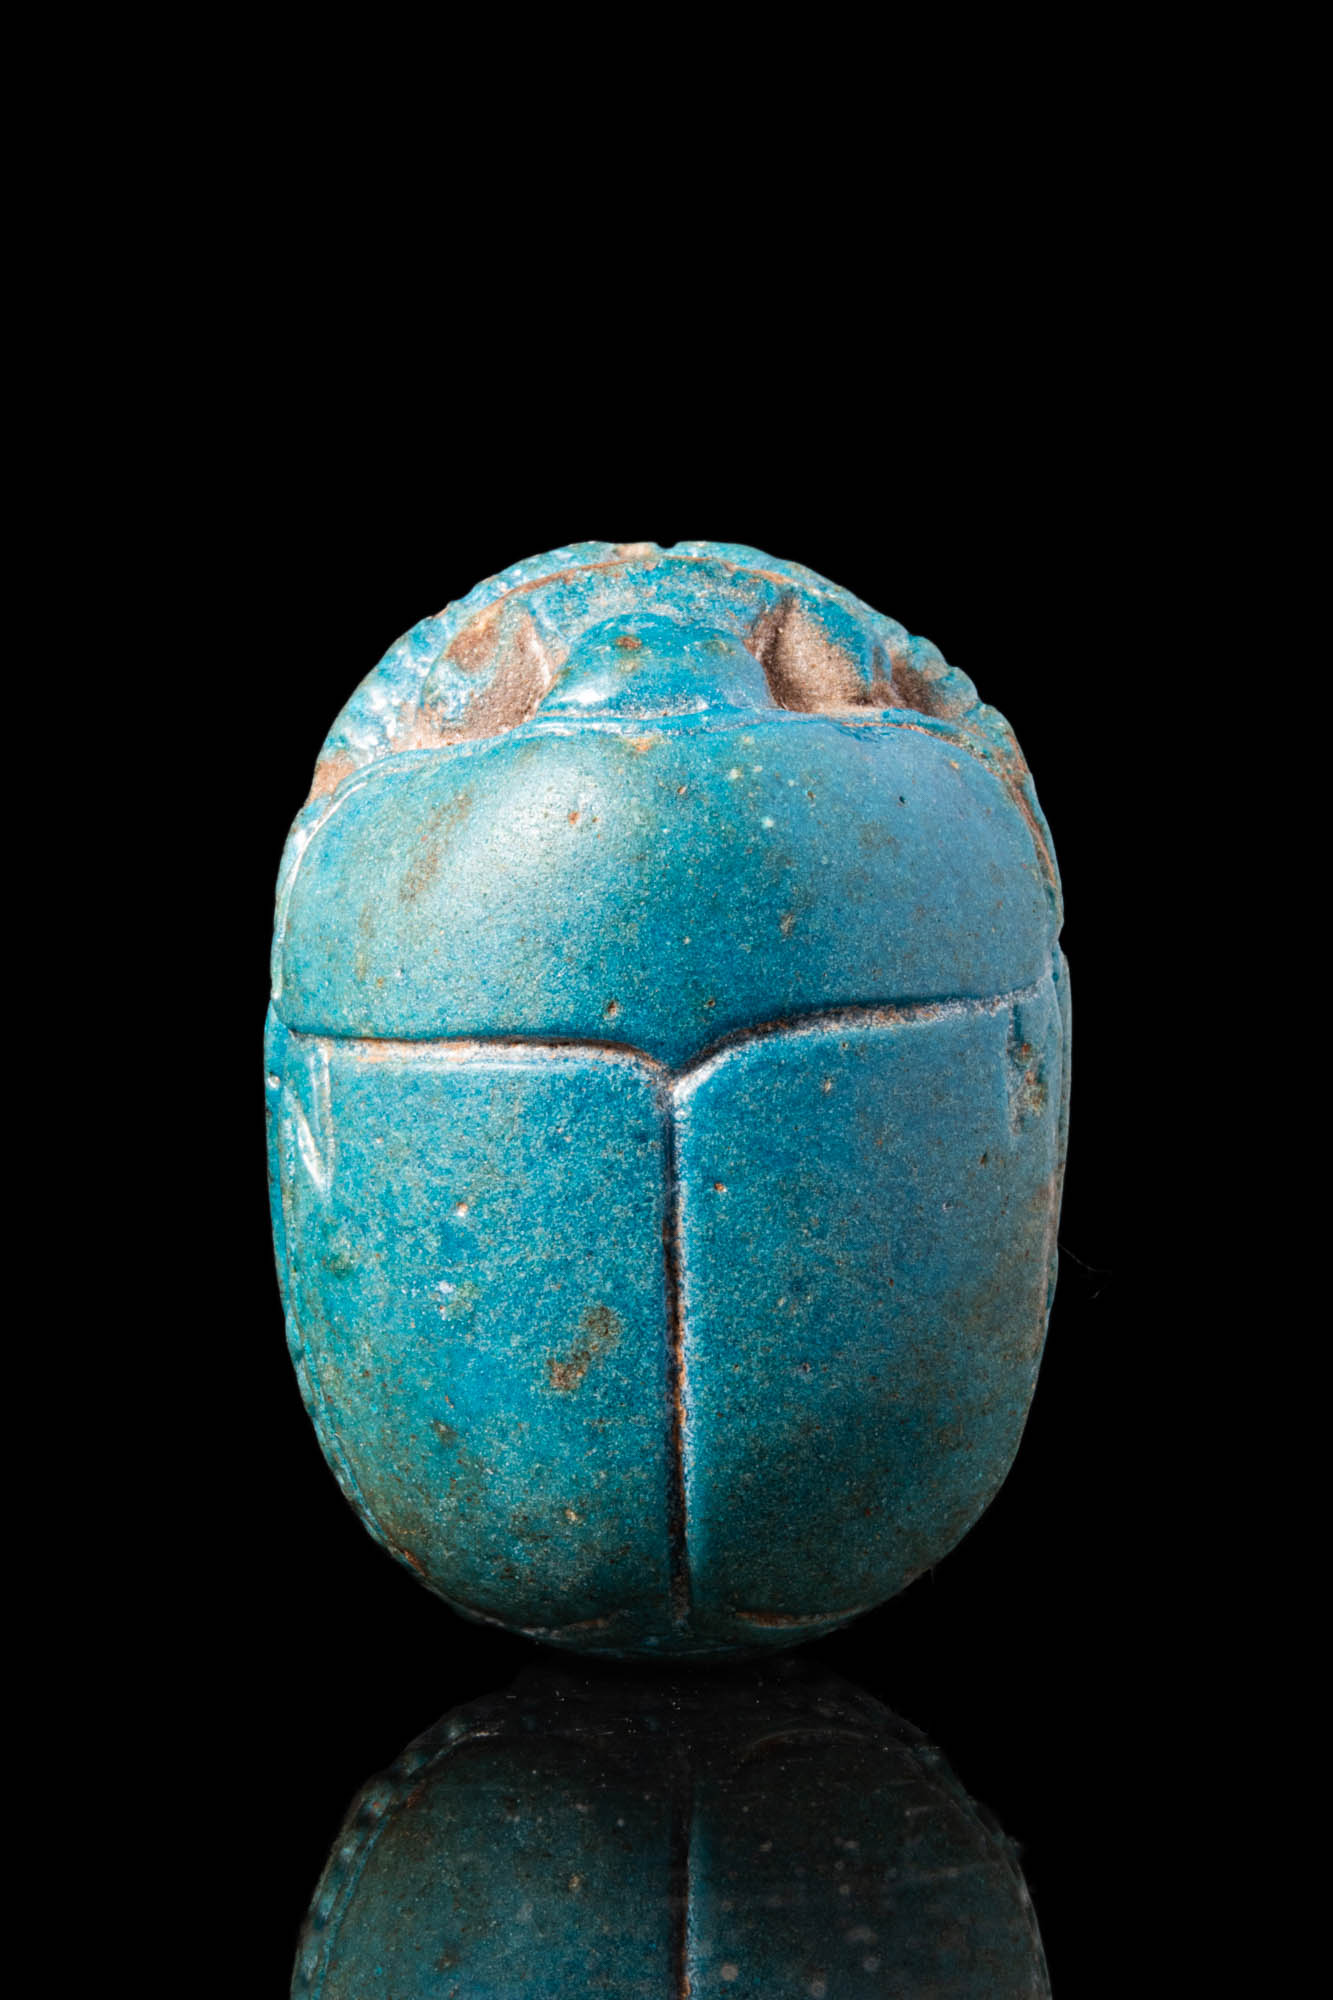 HUGE EGYPTIAN FAIENCE SCARAB WITH CARTOUCHE OF TUT - ANCH - AMON - Image 2 of 4